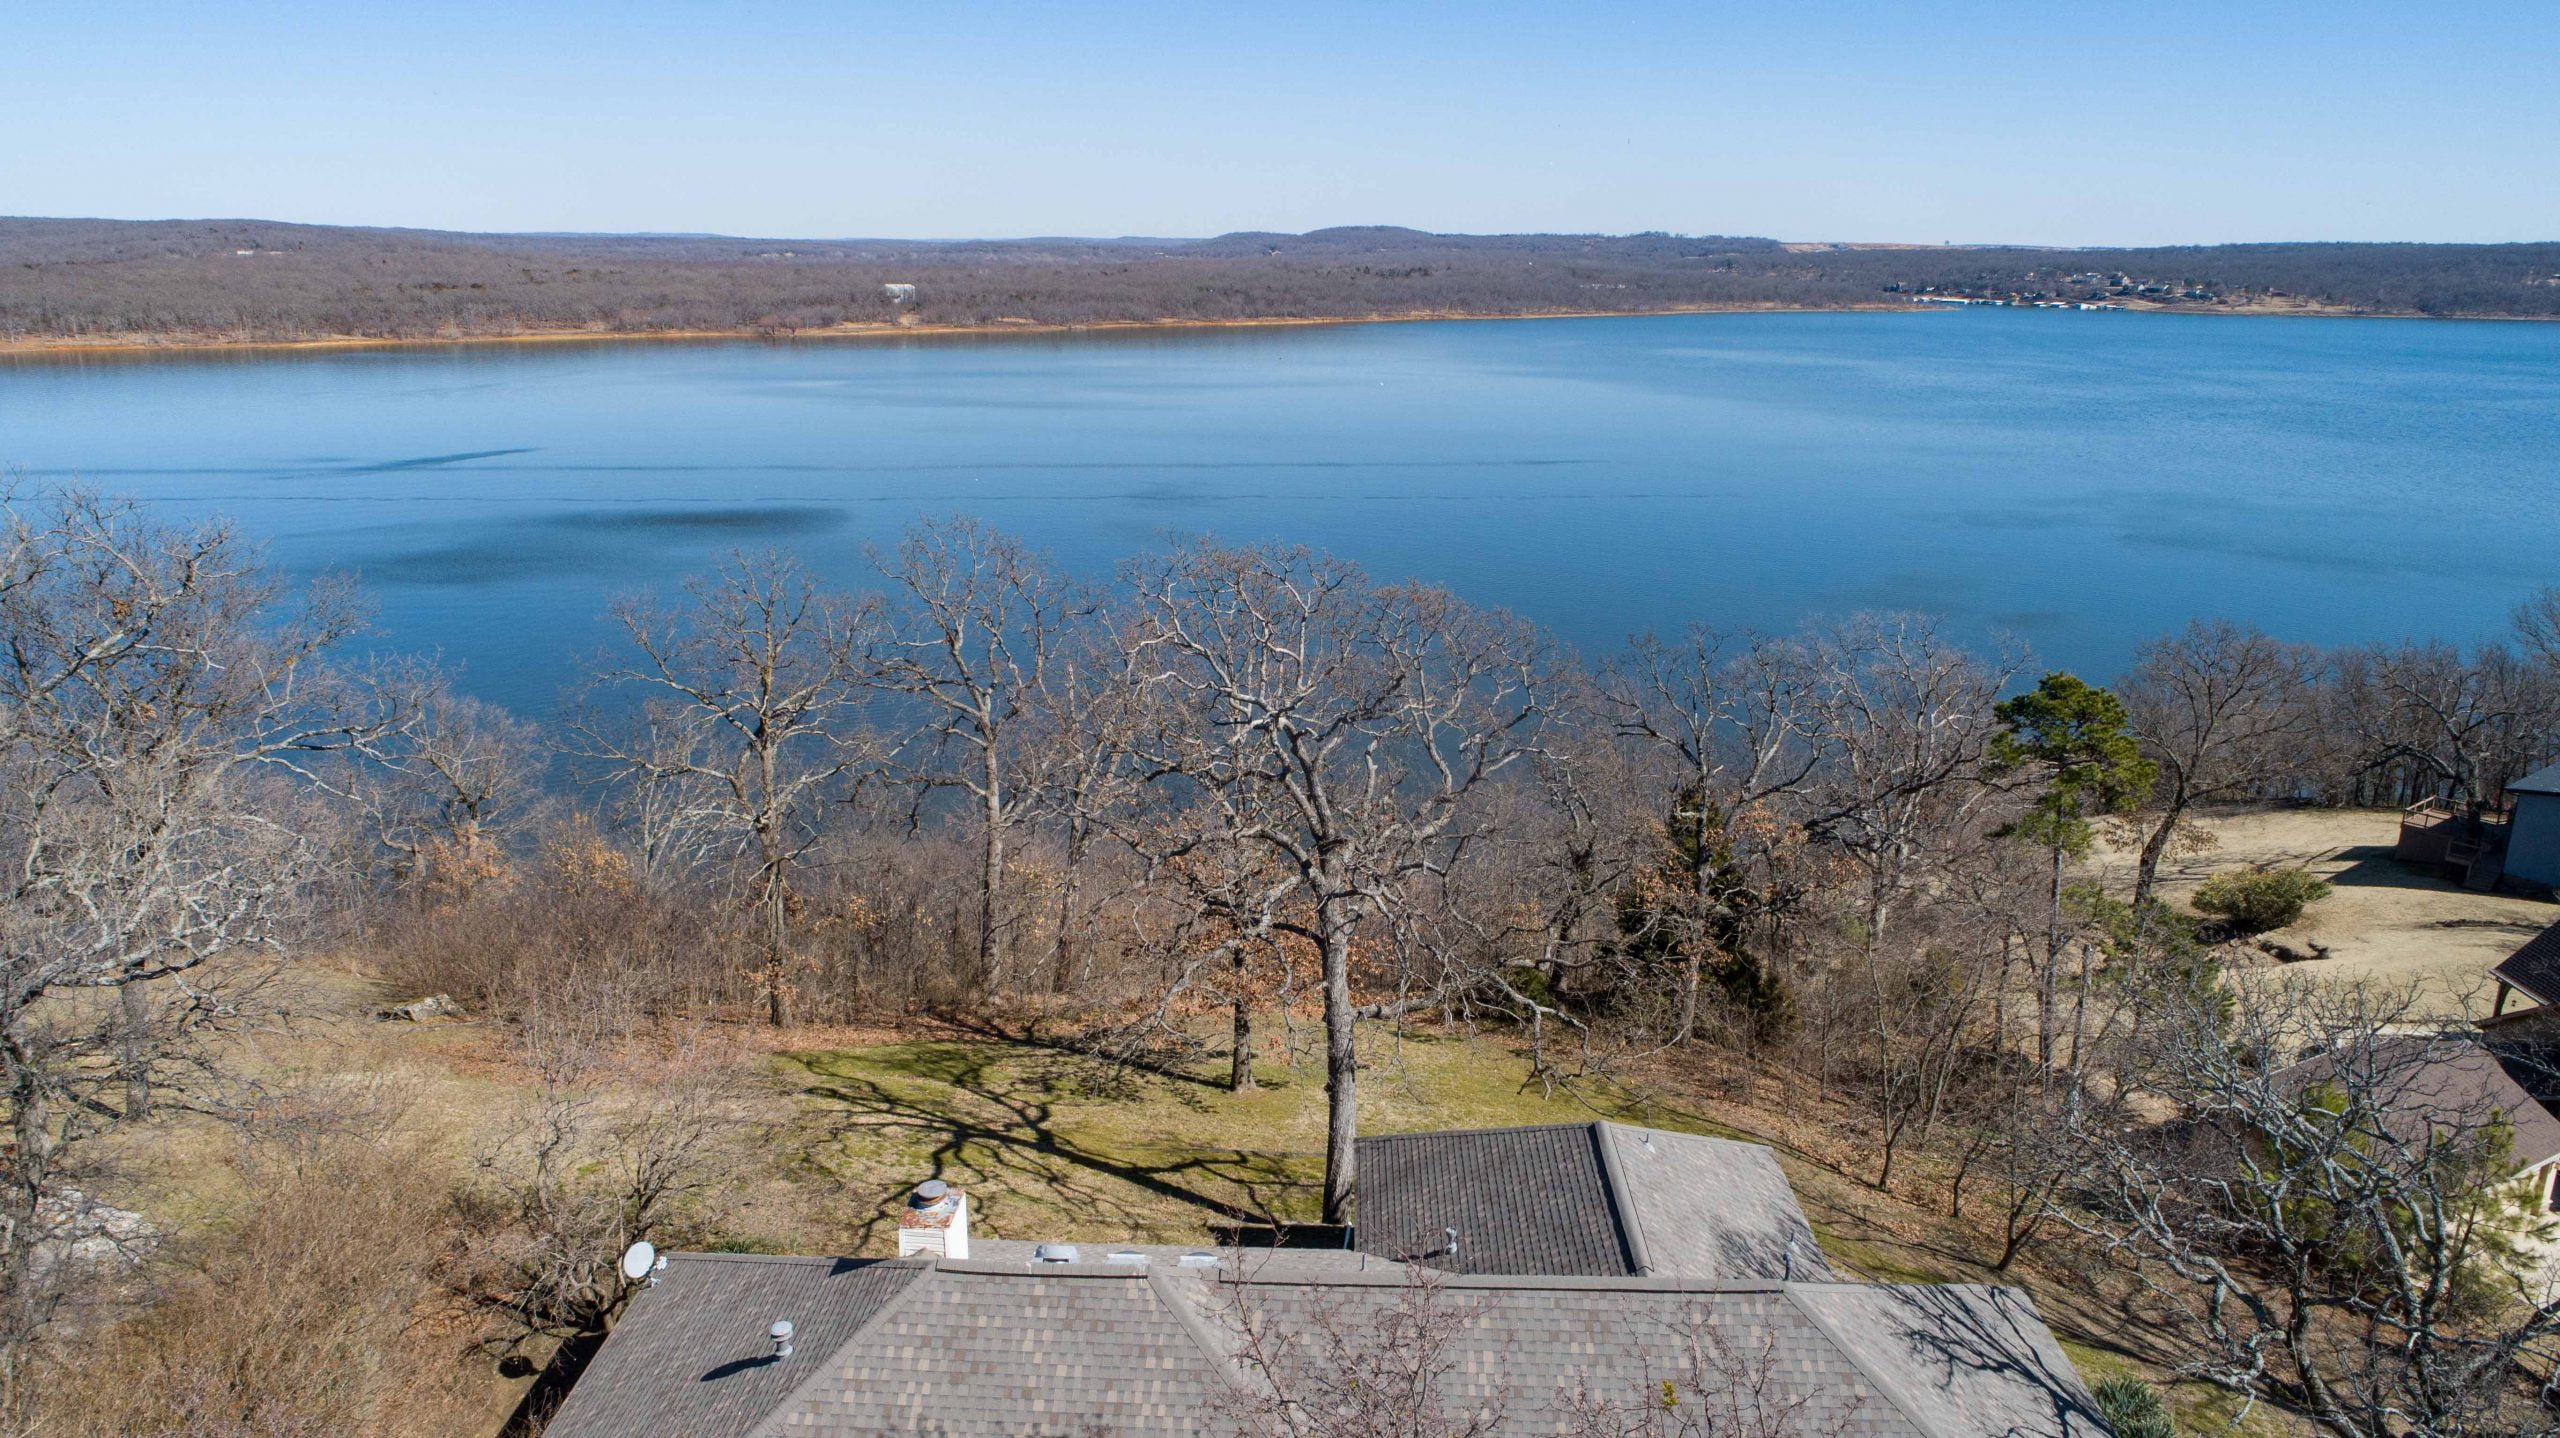 drone real estate photo over looking lake